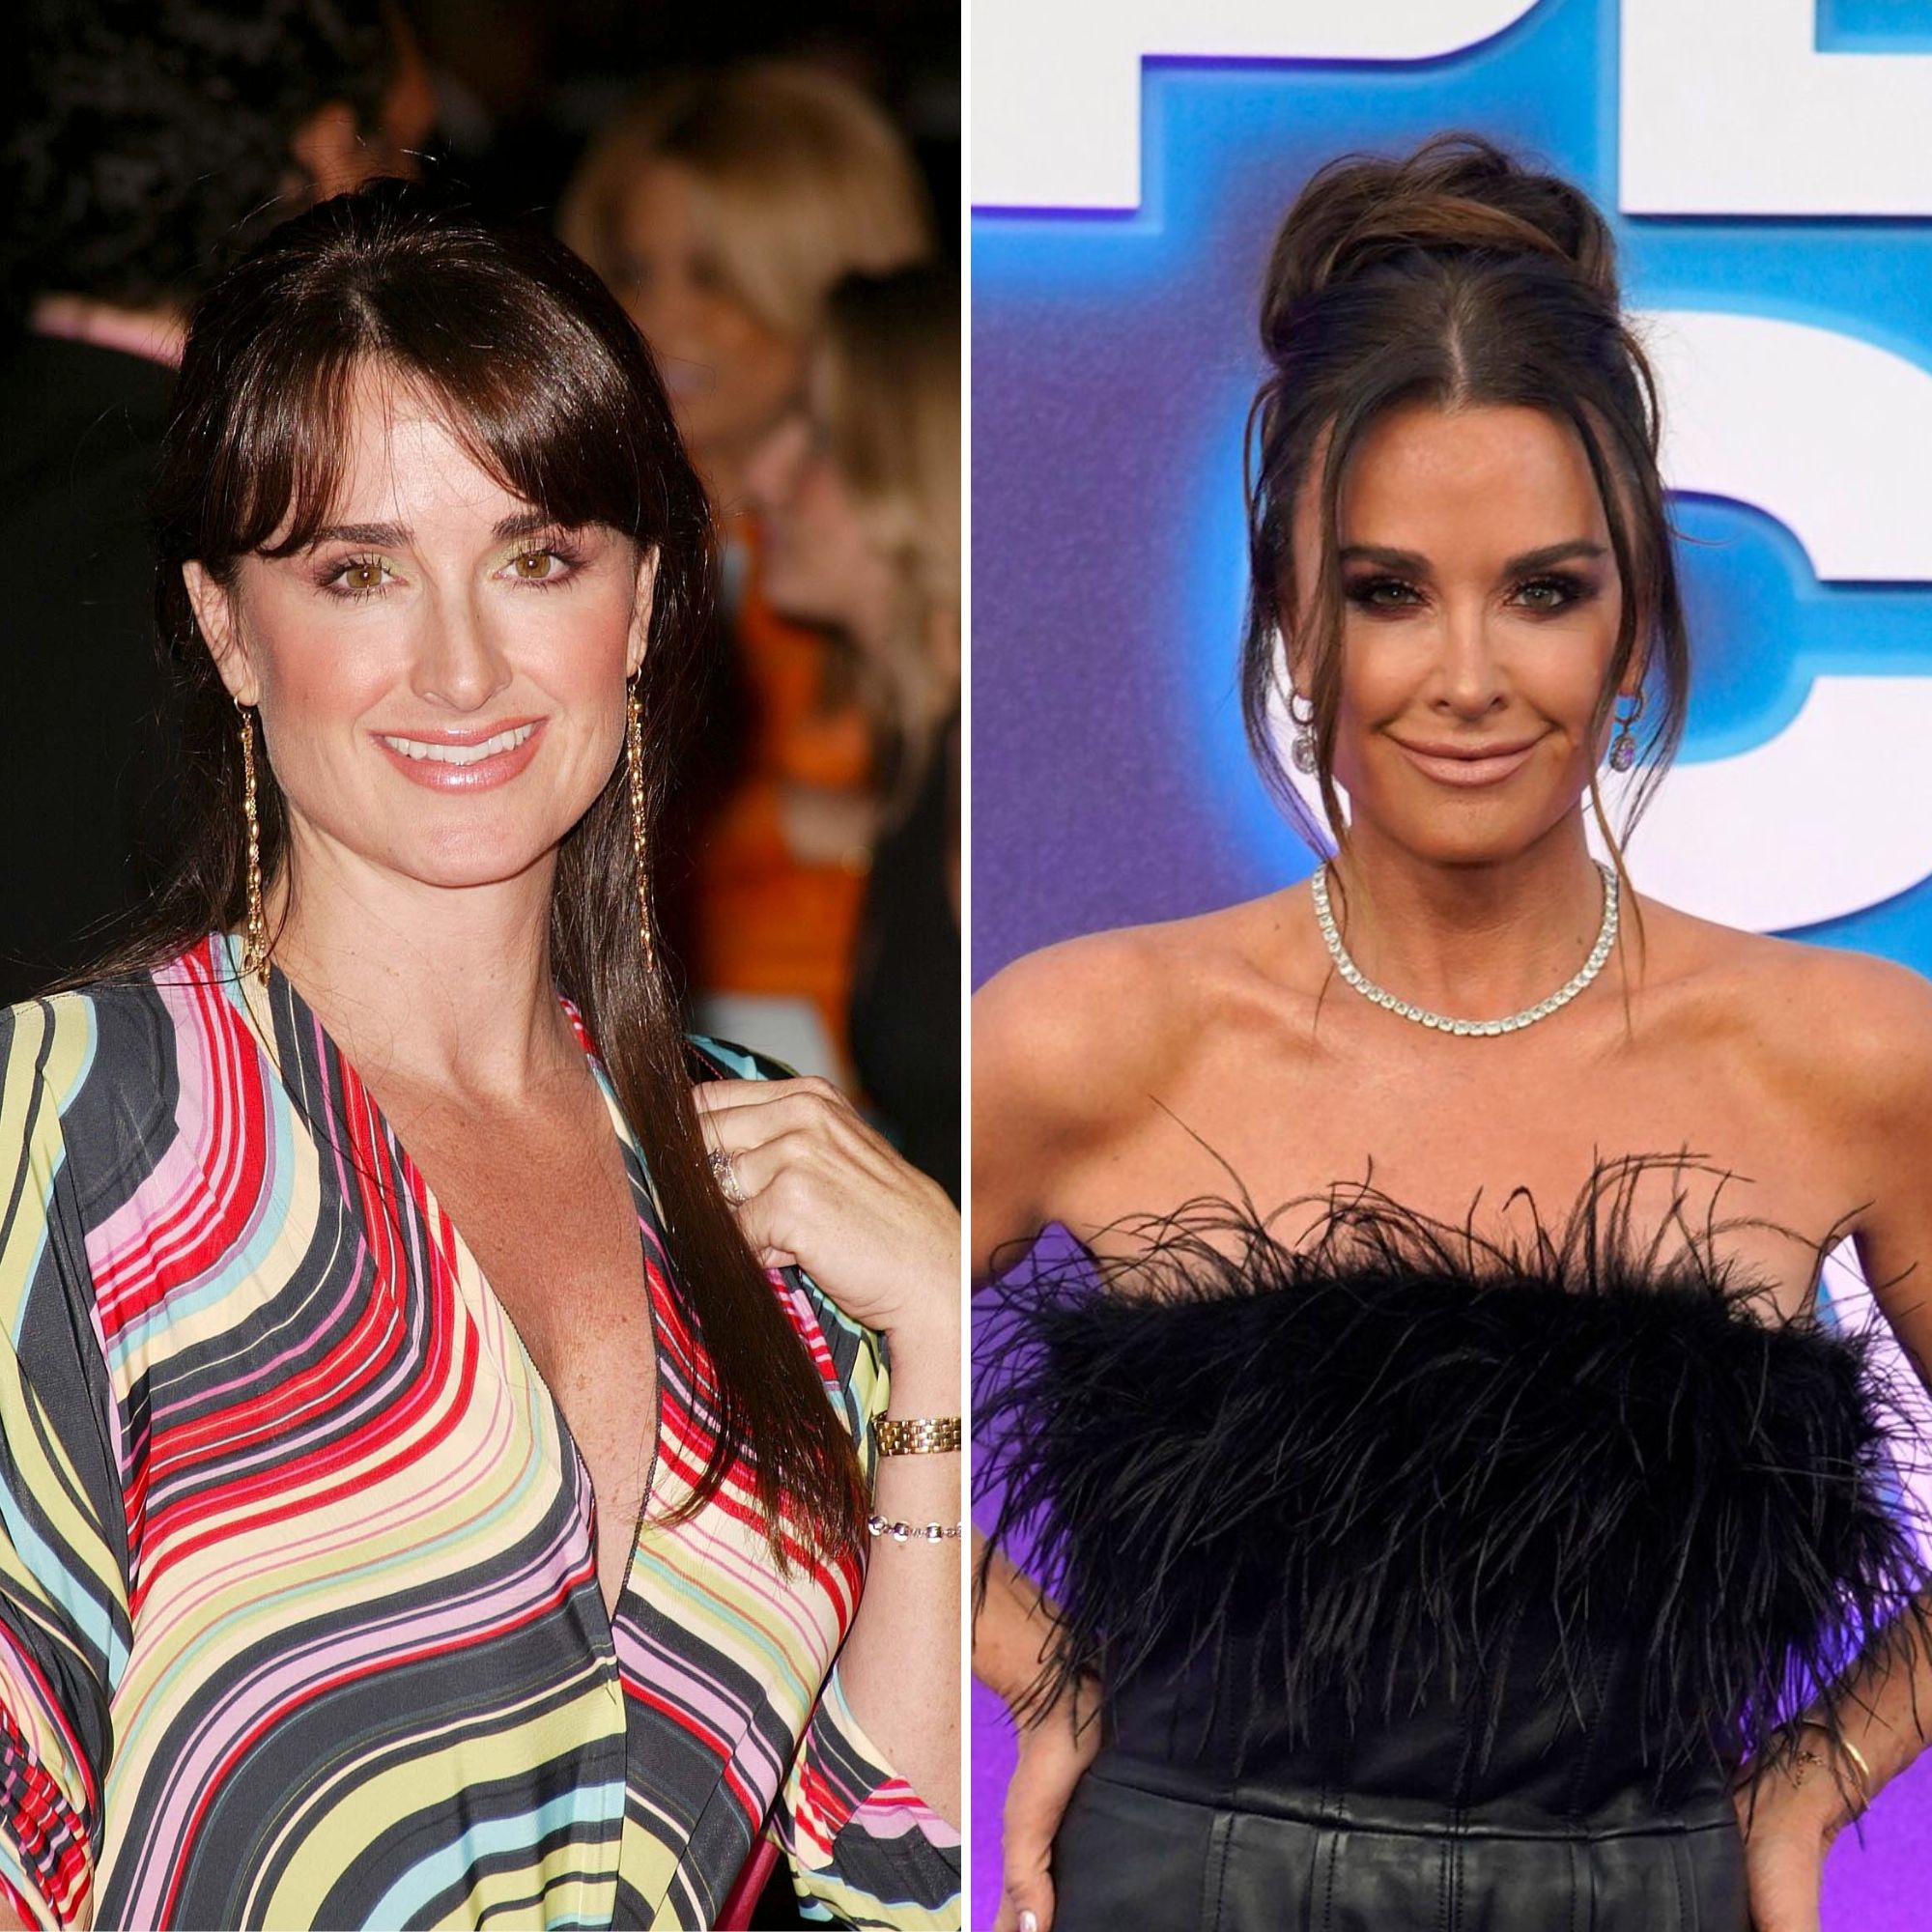 Kyle Richards Transformation RHOBH Star Then and